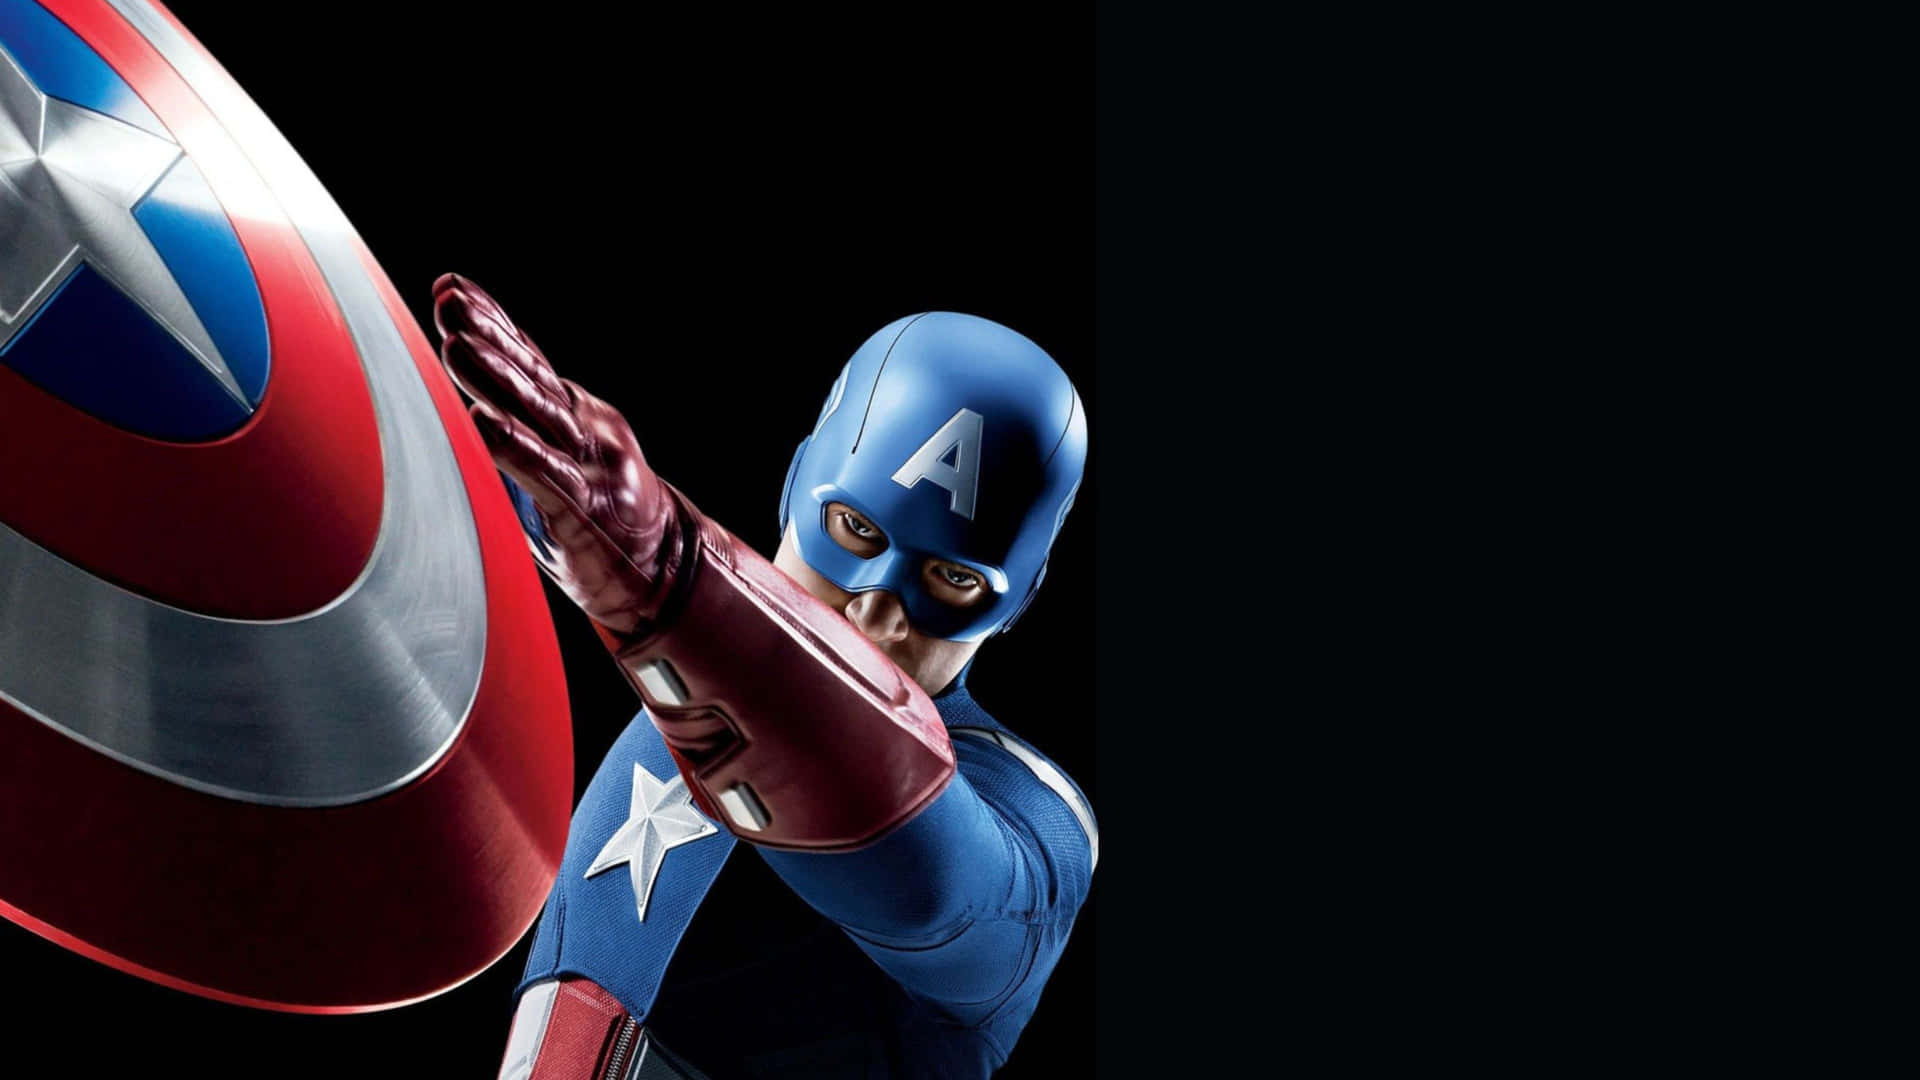 The Avengers' Captain America is stronger than ever